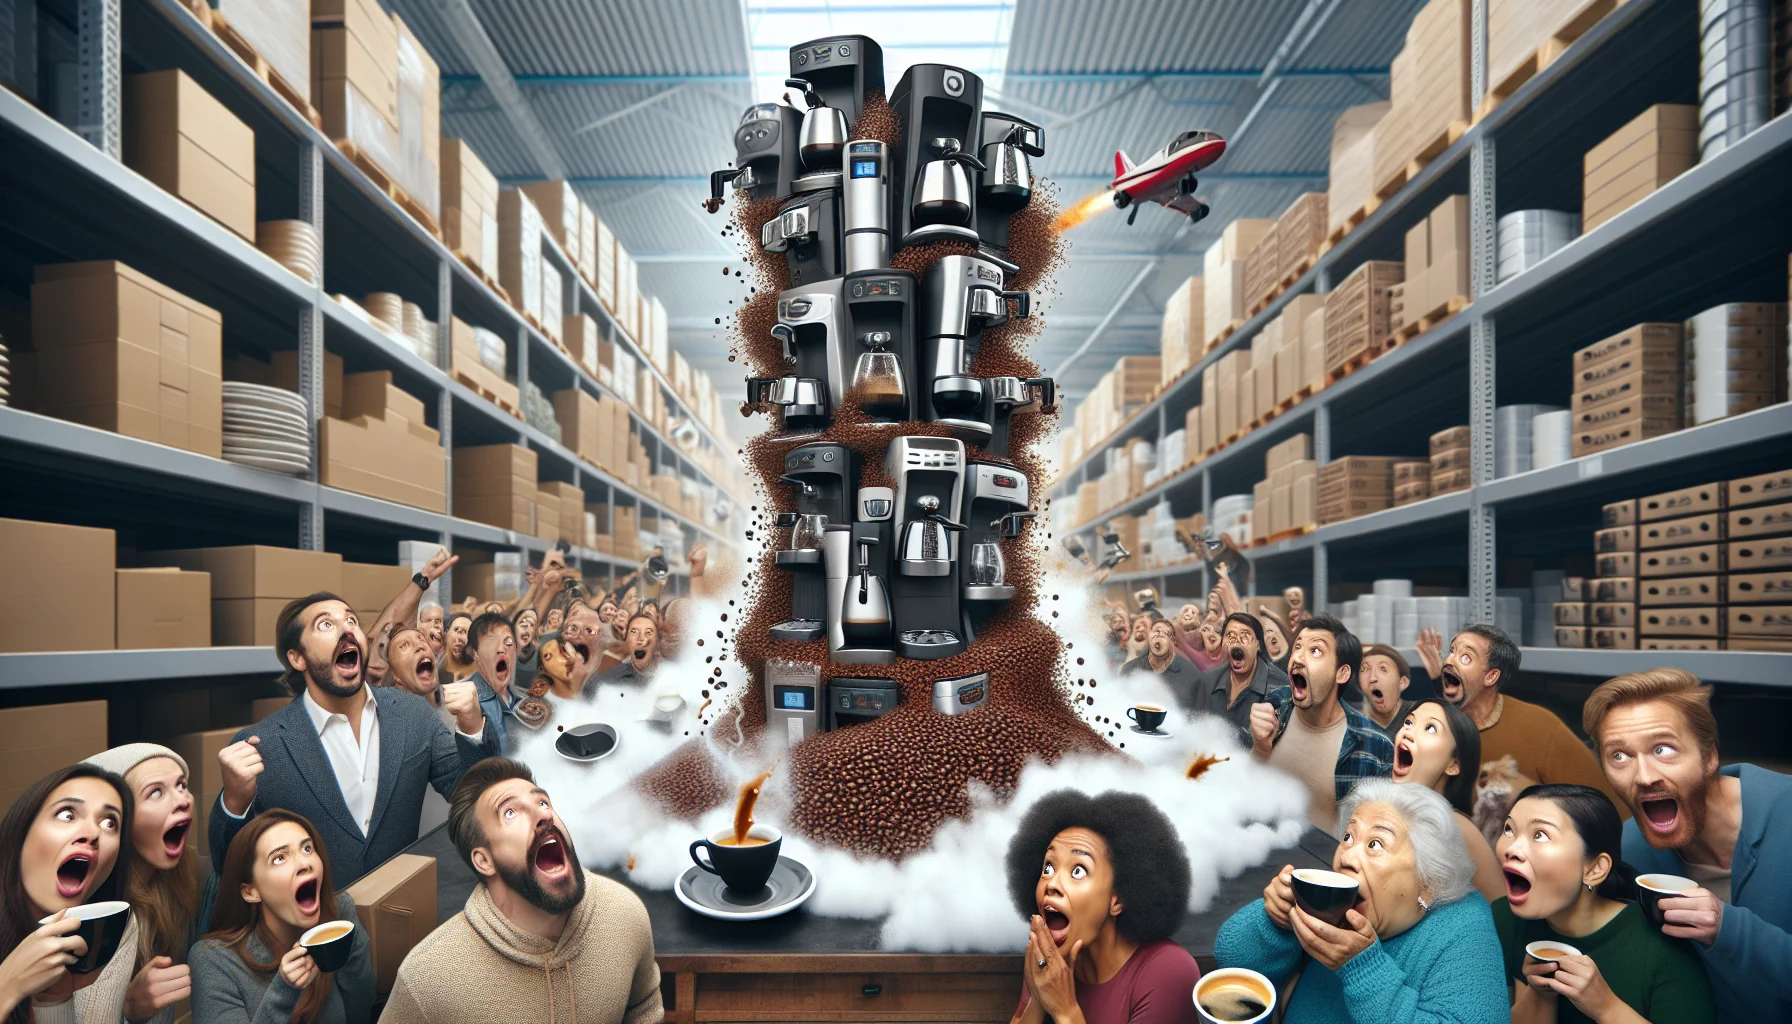 Create a humorously exaggerated scene of Black Friday shopping frenzy at a home goods store. Focus on a towering stack of shiny new espresso machines which is so tall that it nearly touches the ceiling. A diverse crowd of eager customers, including a Caucasian man, a Middle Eastern woman, a Hispanic elderly woman, and an Asian young man, are surrounding the stack, with their eyes wide in amazement and excitement. Add some surreal elements such as flying coffee cups, a river of steaming espresso flowing down the aisles, and foam spelling out 'Great Deal!' in the air, creating a fantastical, enticing atmosphere.